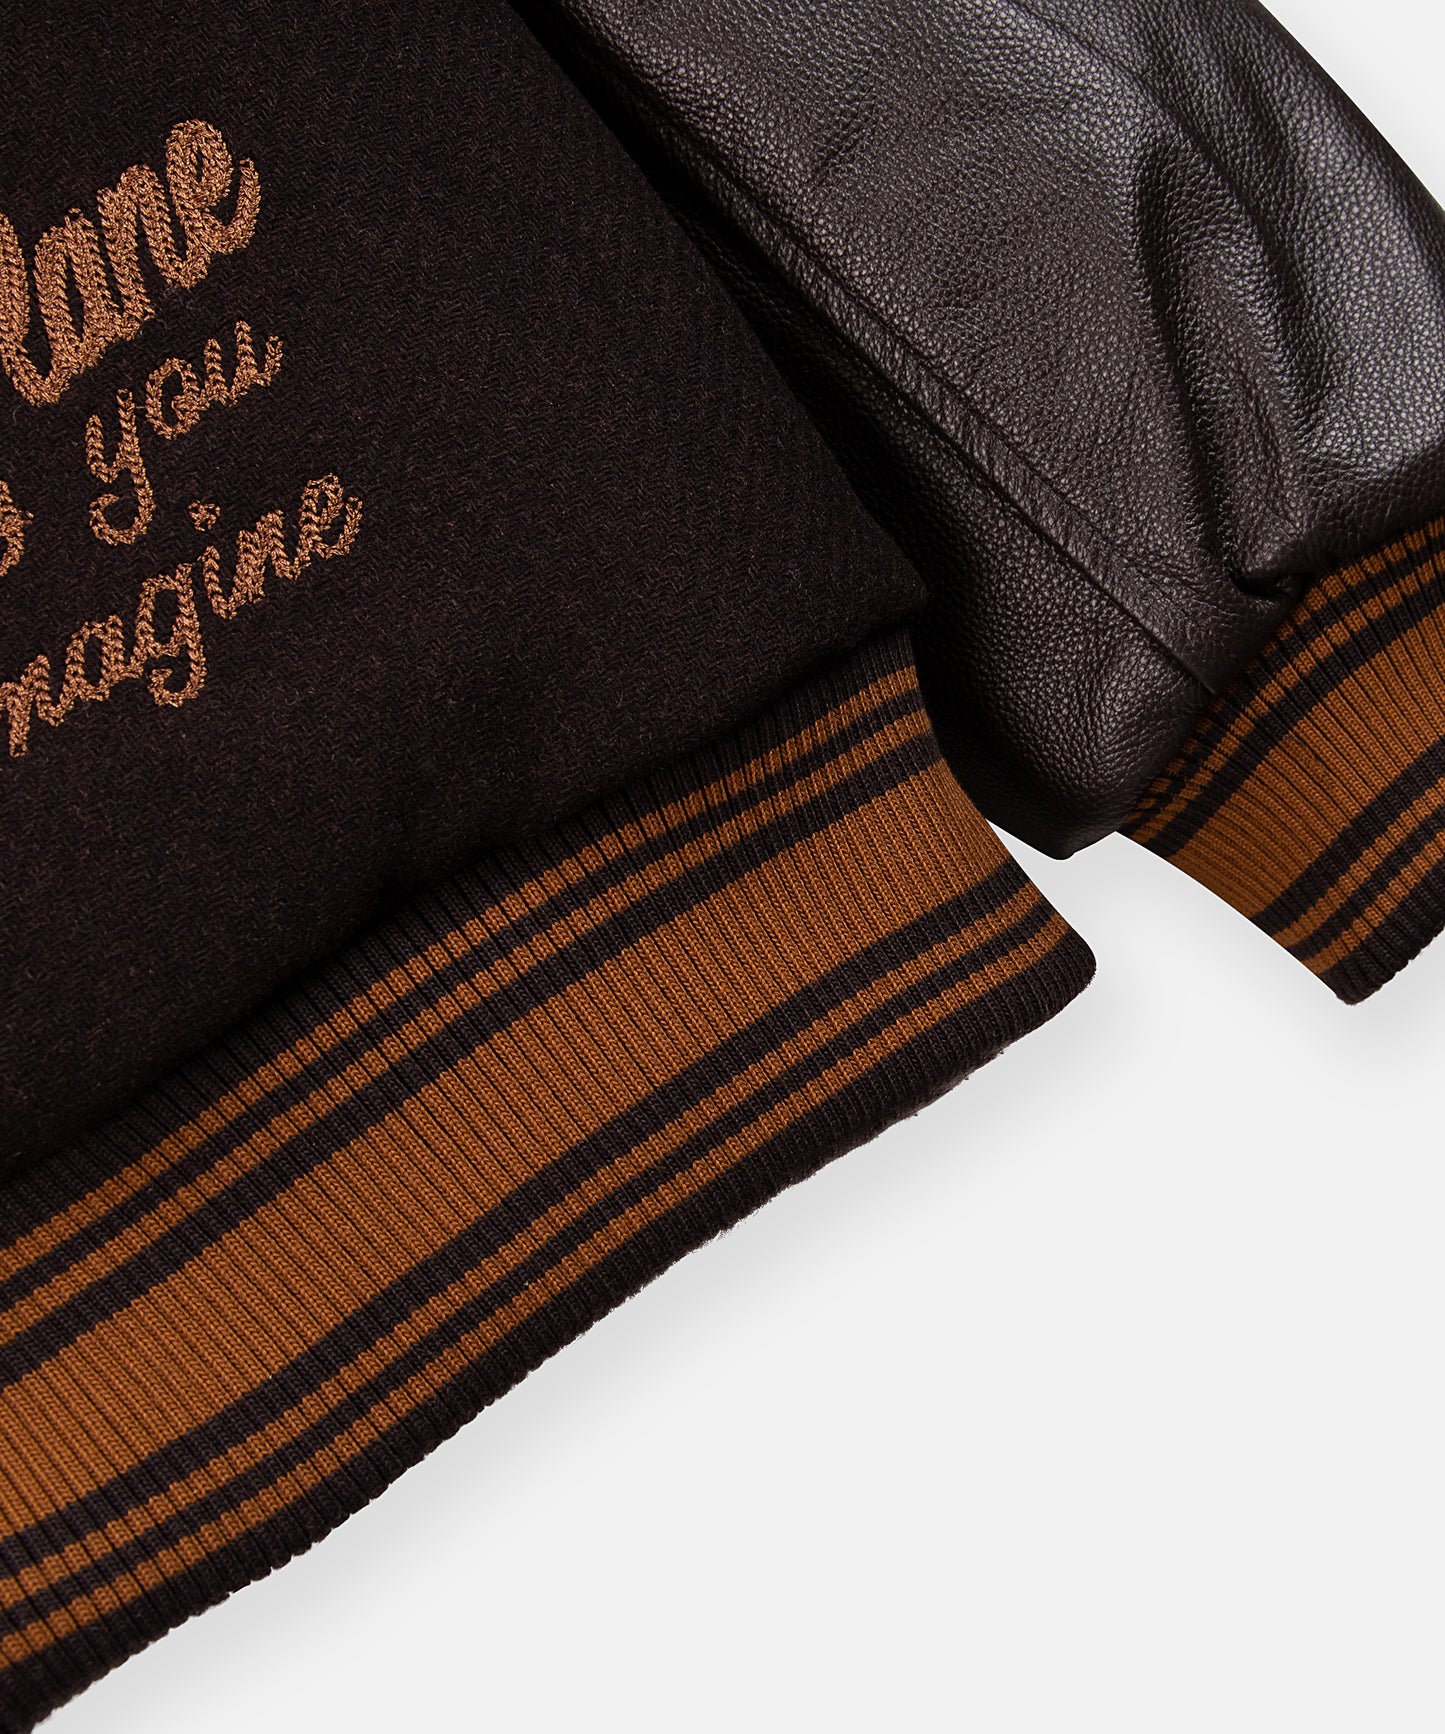 CUSTOM_ALT_TEXT: Striped ribbing at waistband and cuff on Paper Planes Eternally Greatfull Varity Jacket, color Brown.